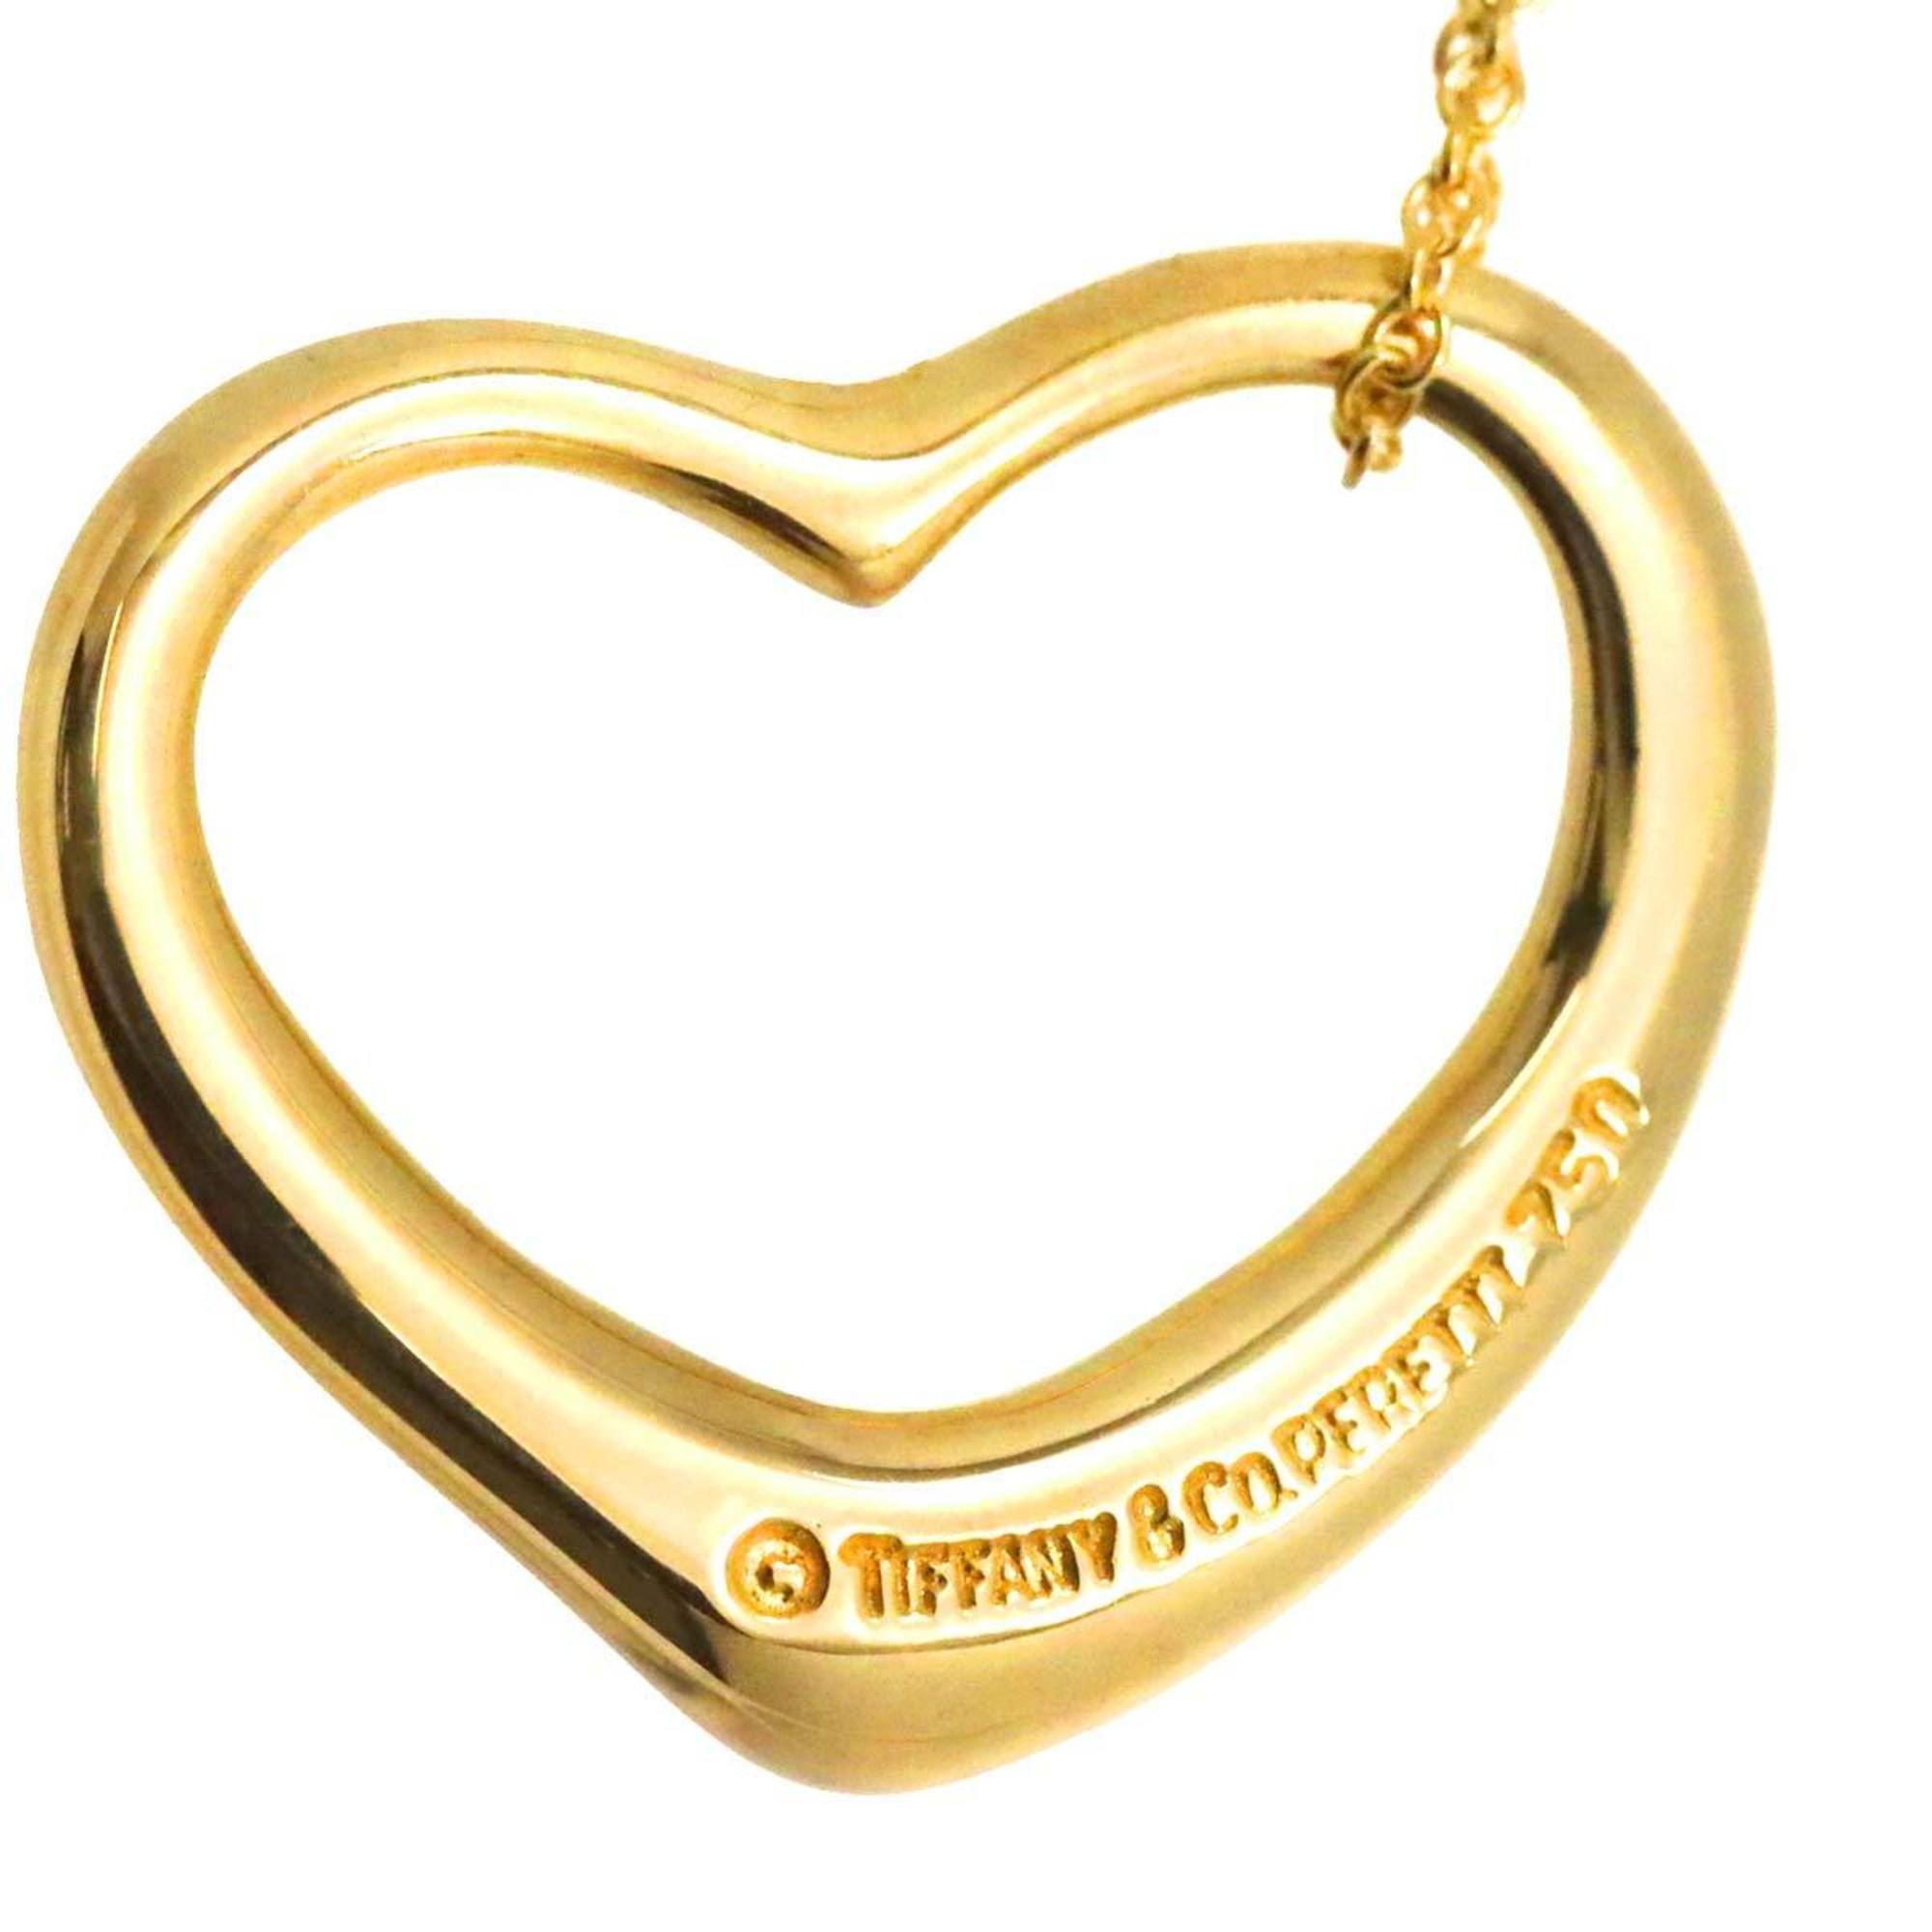 Tiffany & Co. Heart 22mm Necklace 41cm K18 YG Yellow Gold 750 Open